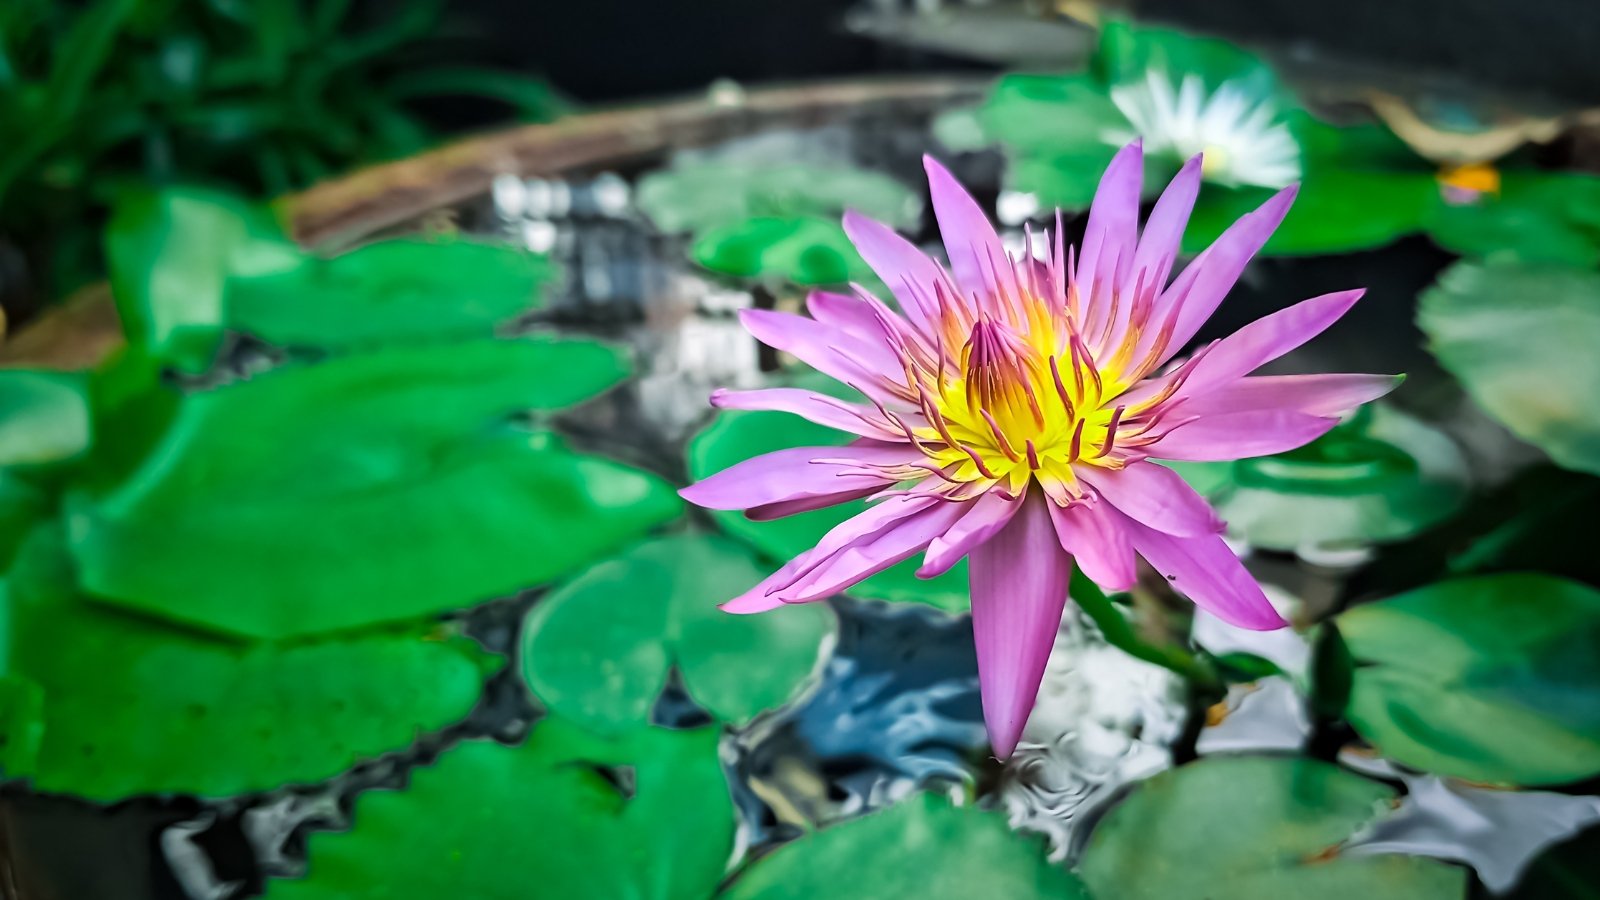 Nymphaea showcases round, floating leaves and elegant flower consisting of several layers of soft lavender petals with pointed tips, gathering in the center with a gradient yellow hue.